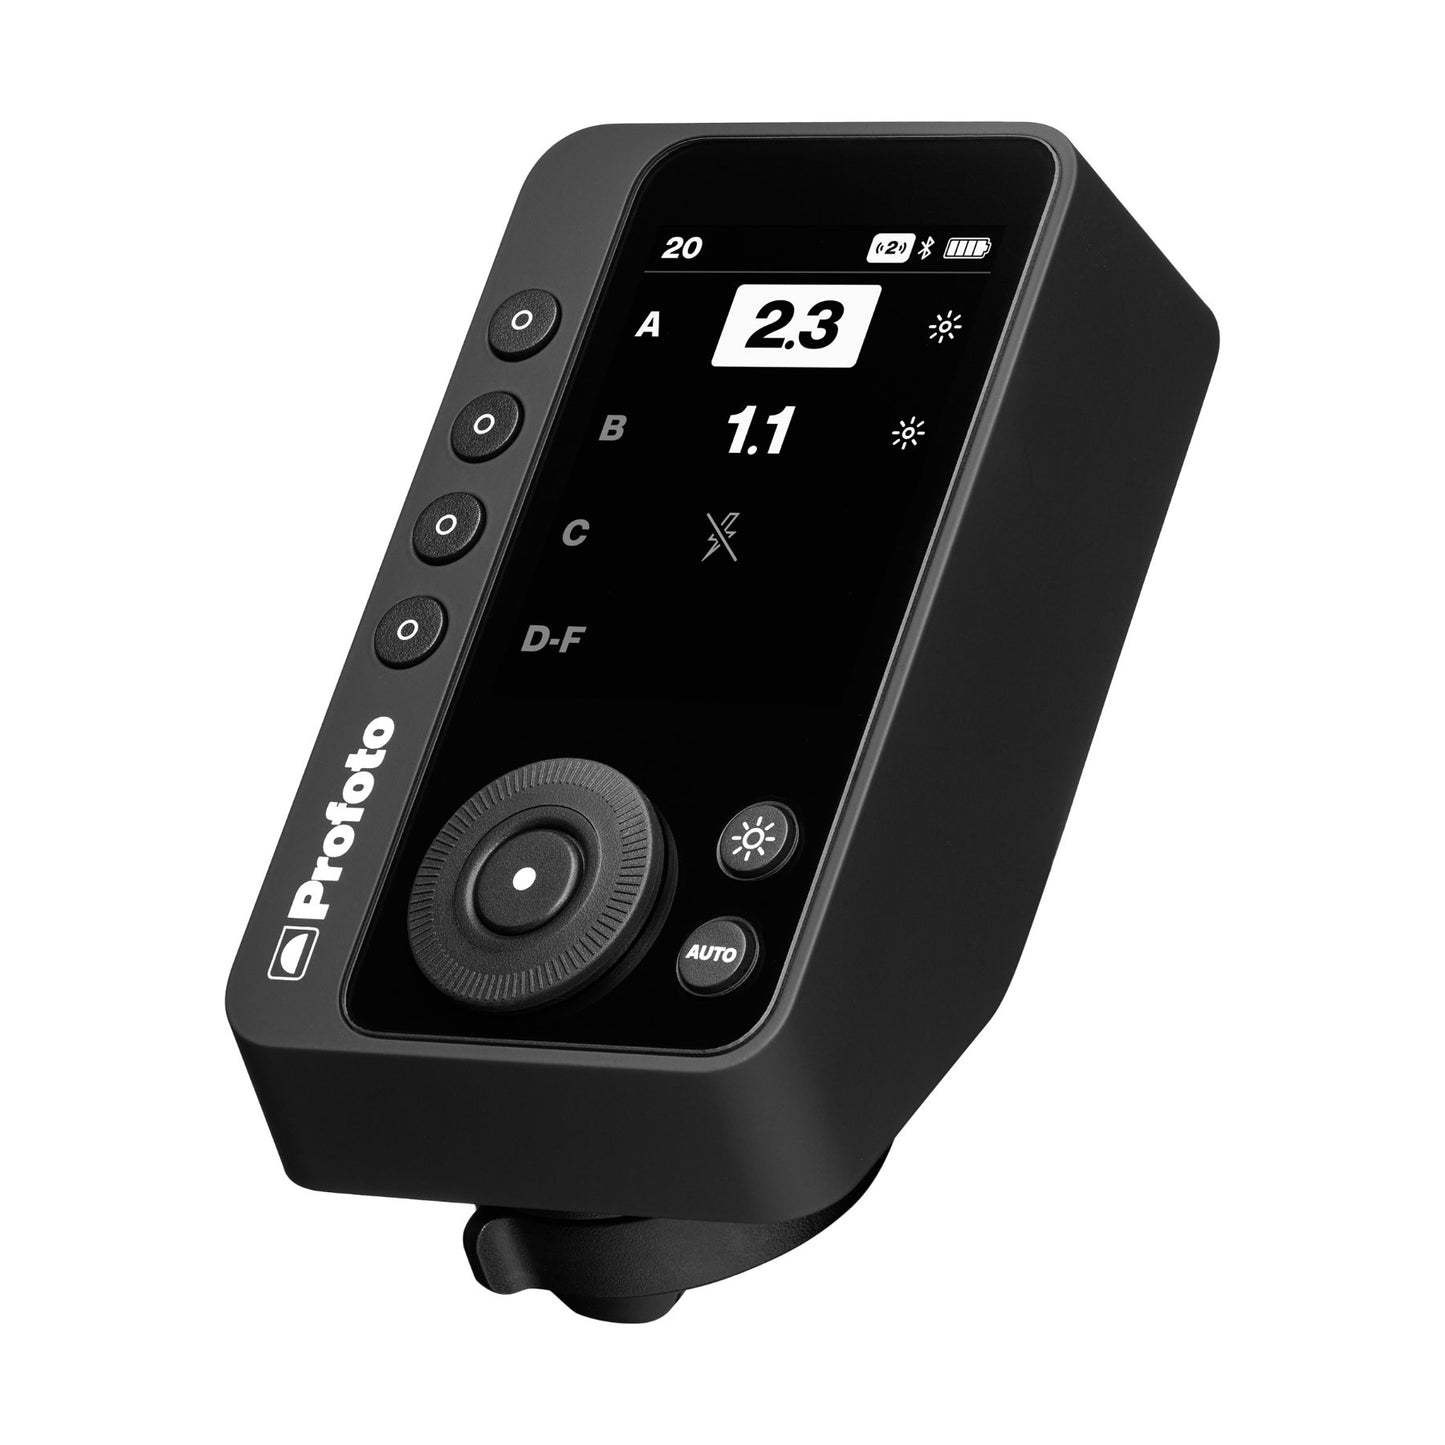 Buy Profoto Connect Pro Flash Trigger at Topic Store